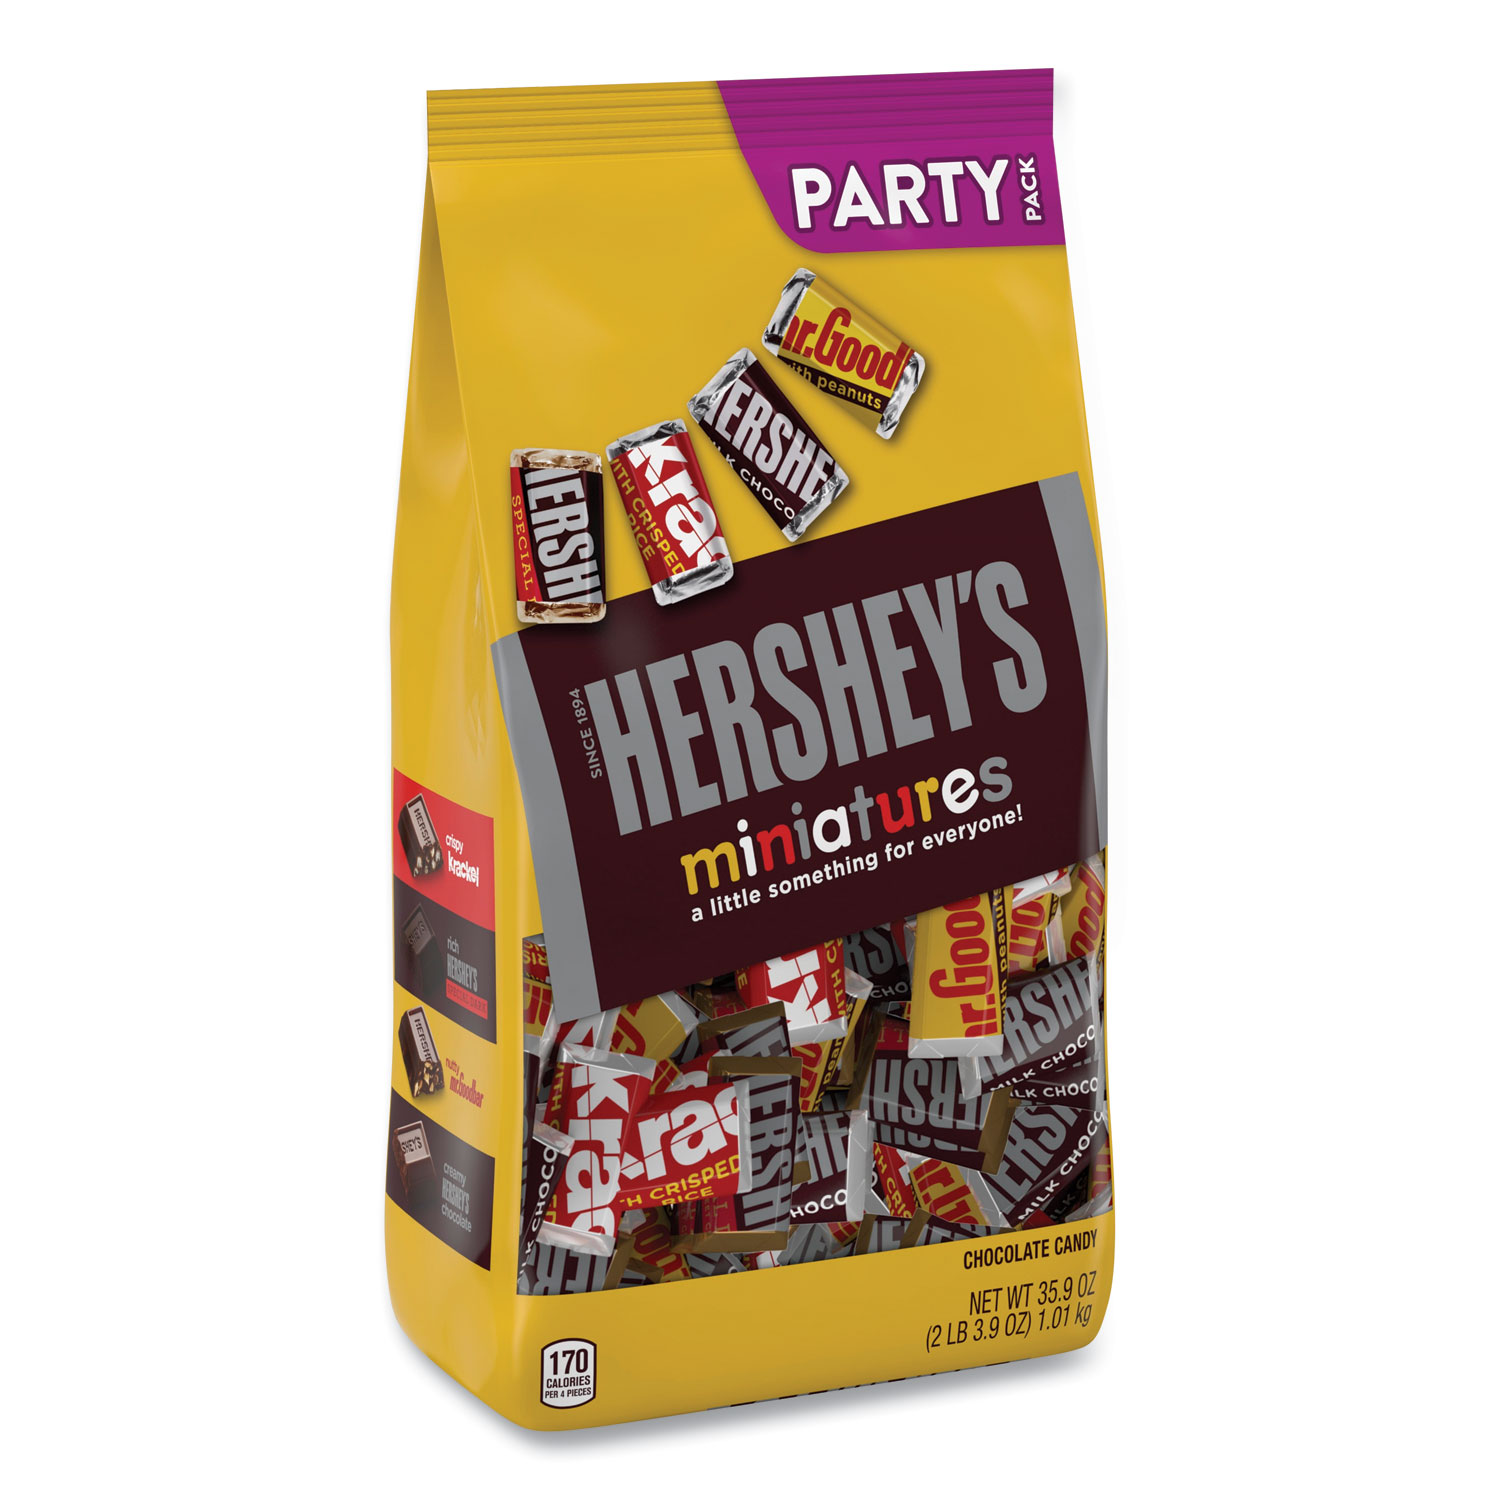  Hershey's 21458 Miniatures Variety Party Pack, Assorted Chocolates, 35.9 oz Bag, Free Delivery in 1-4 Business Days (GRR24600402) 